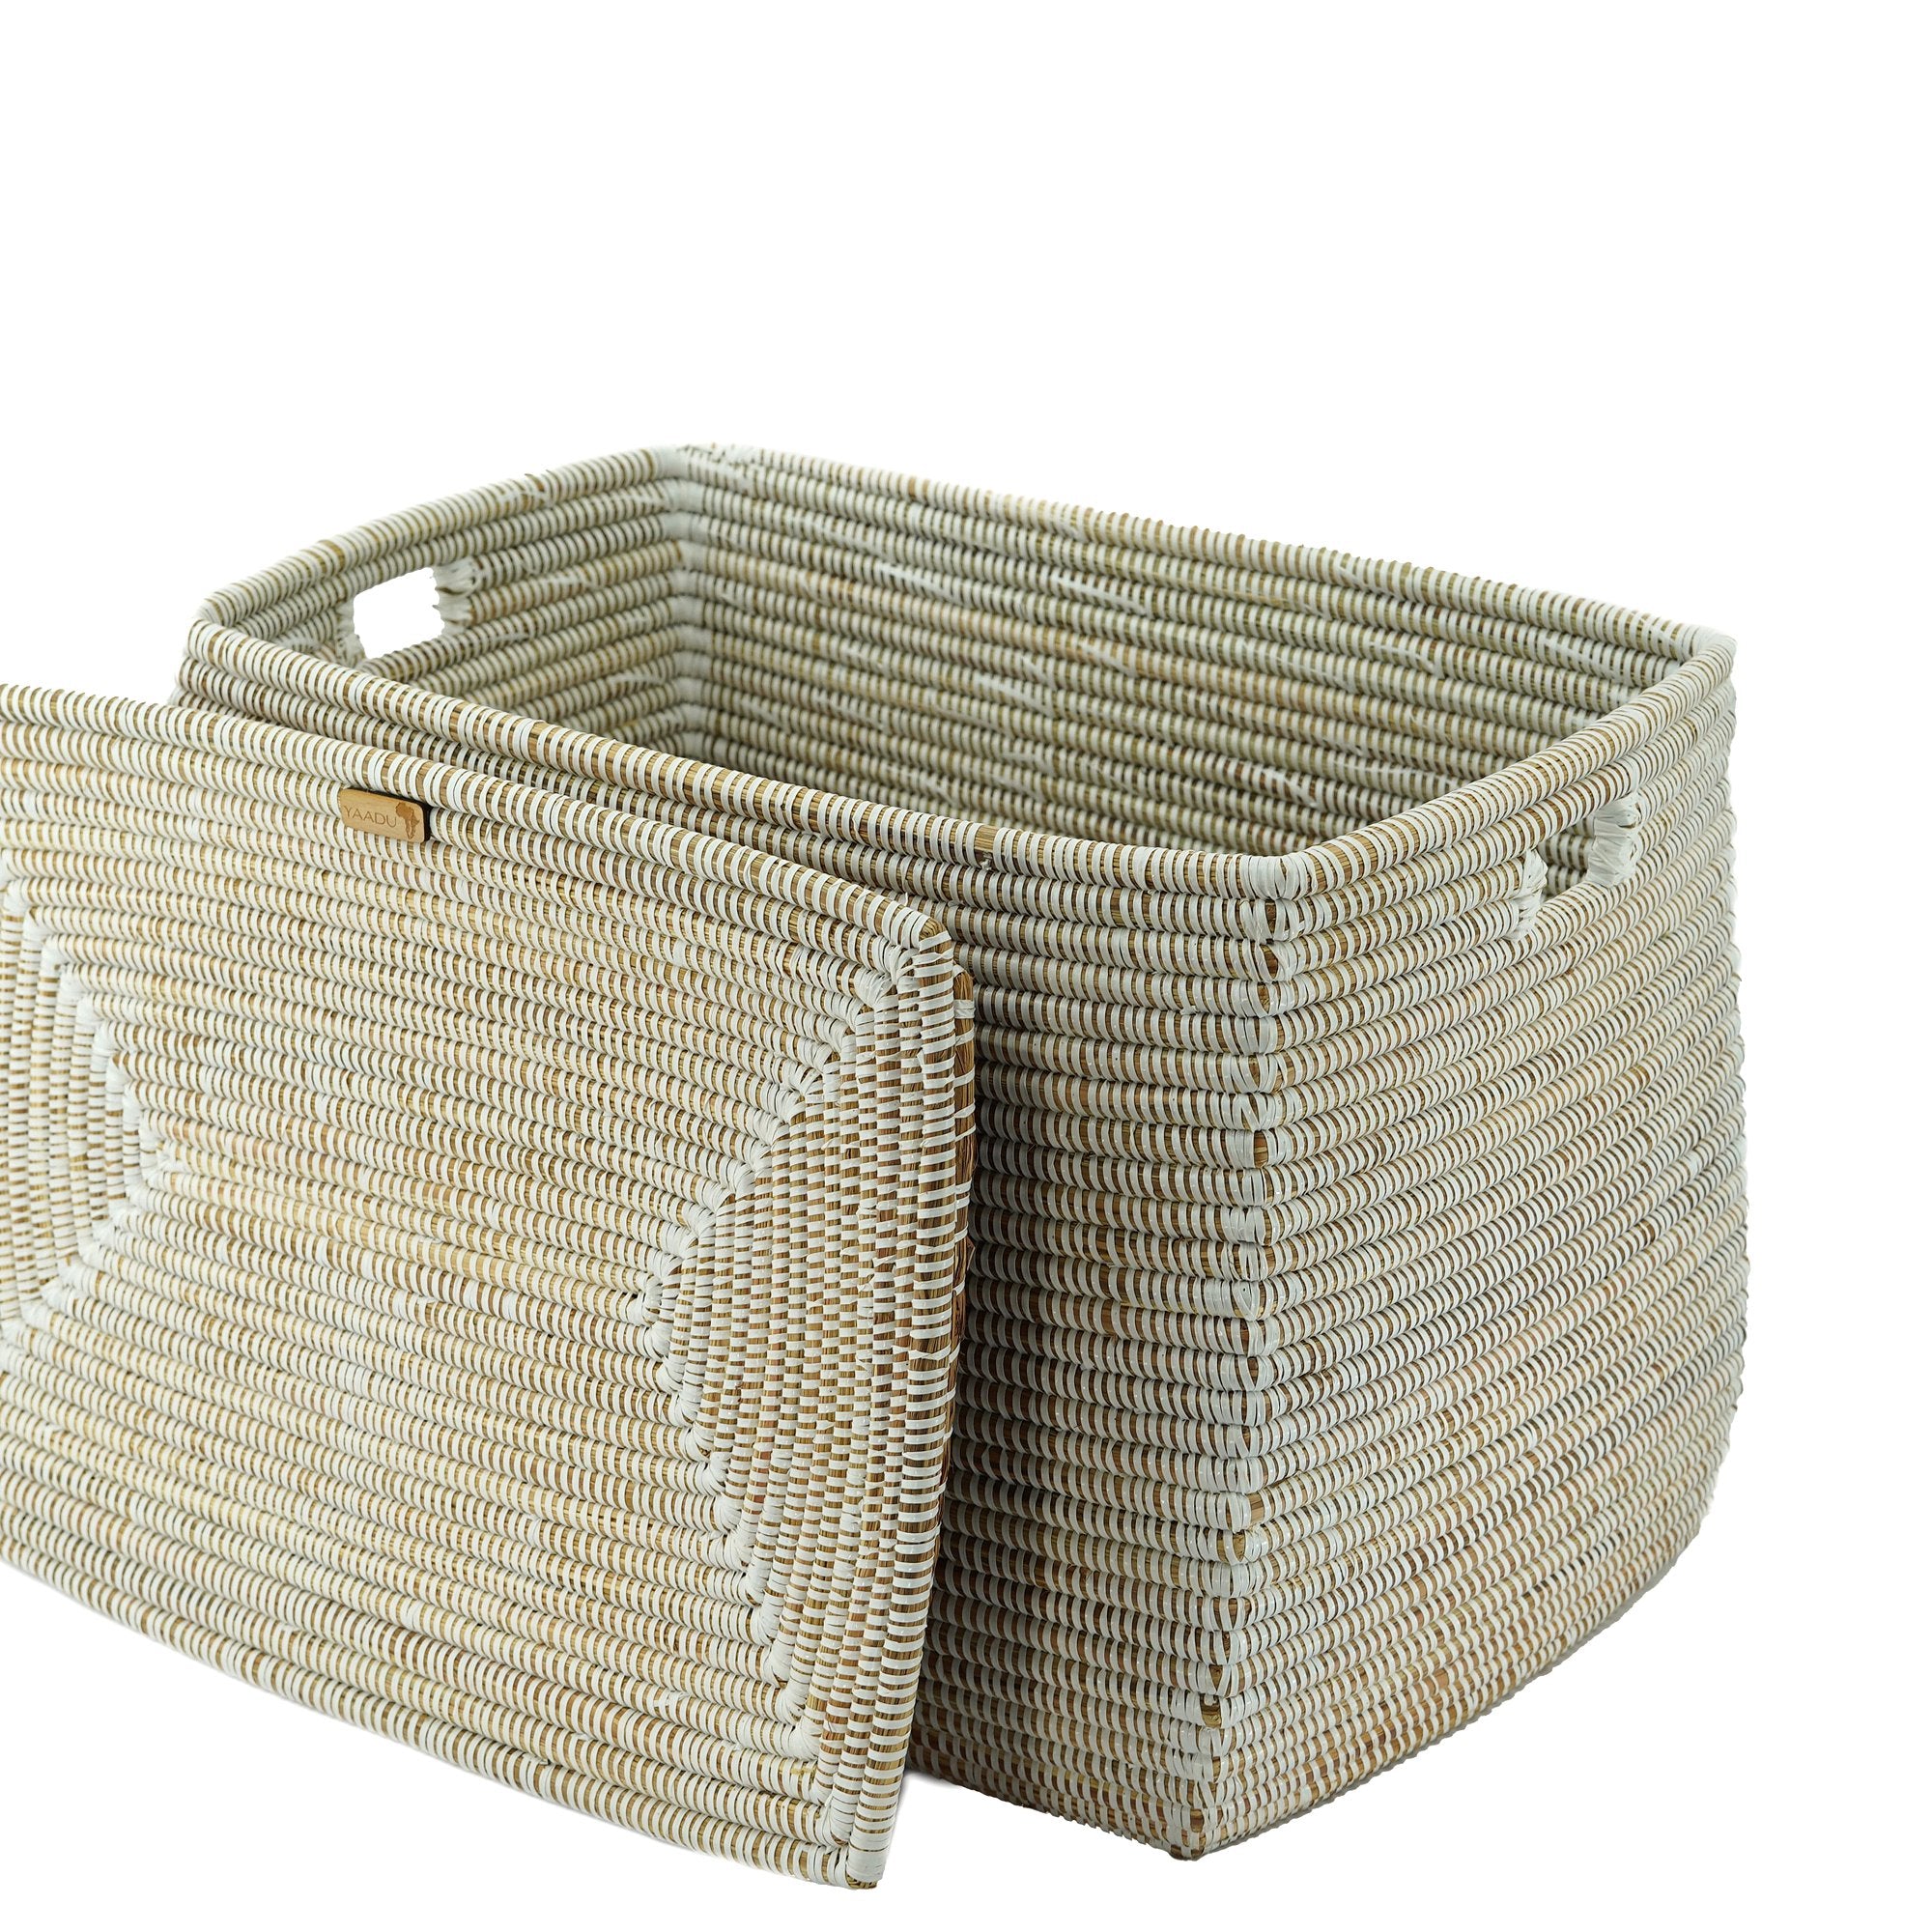 XXL basket chest with lid – Maathal